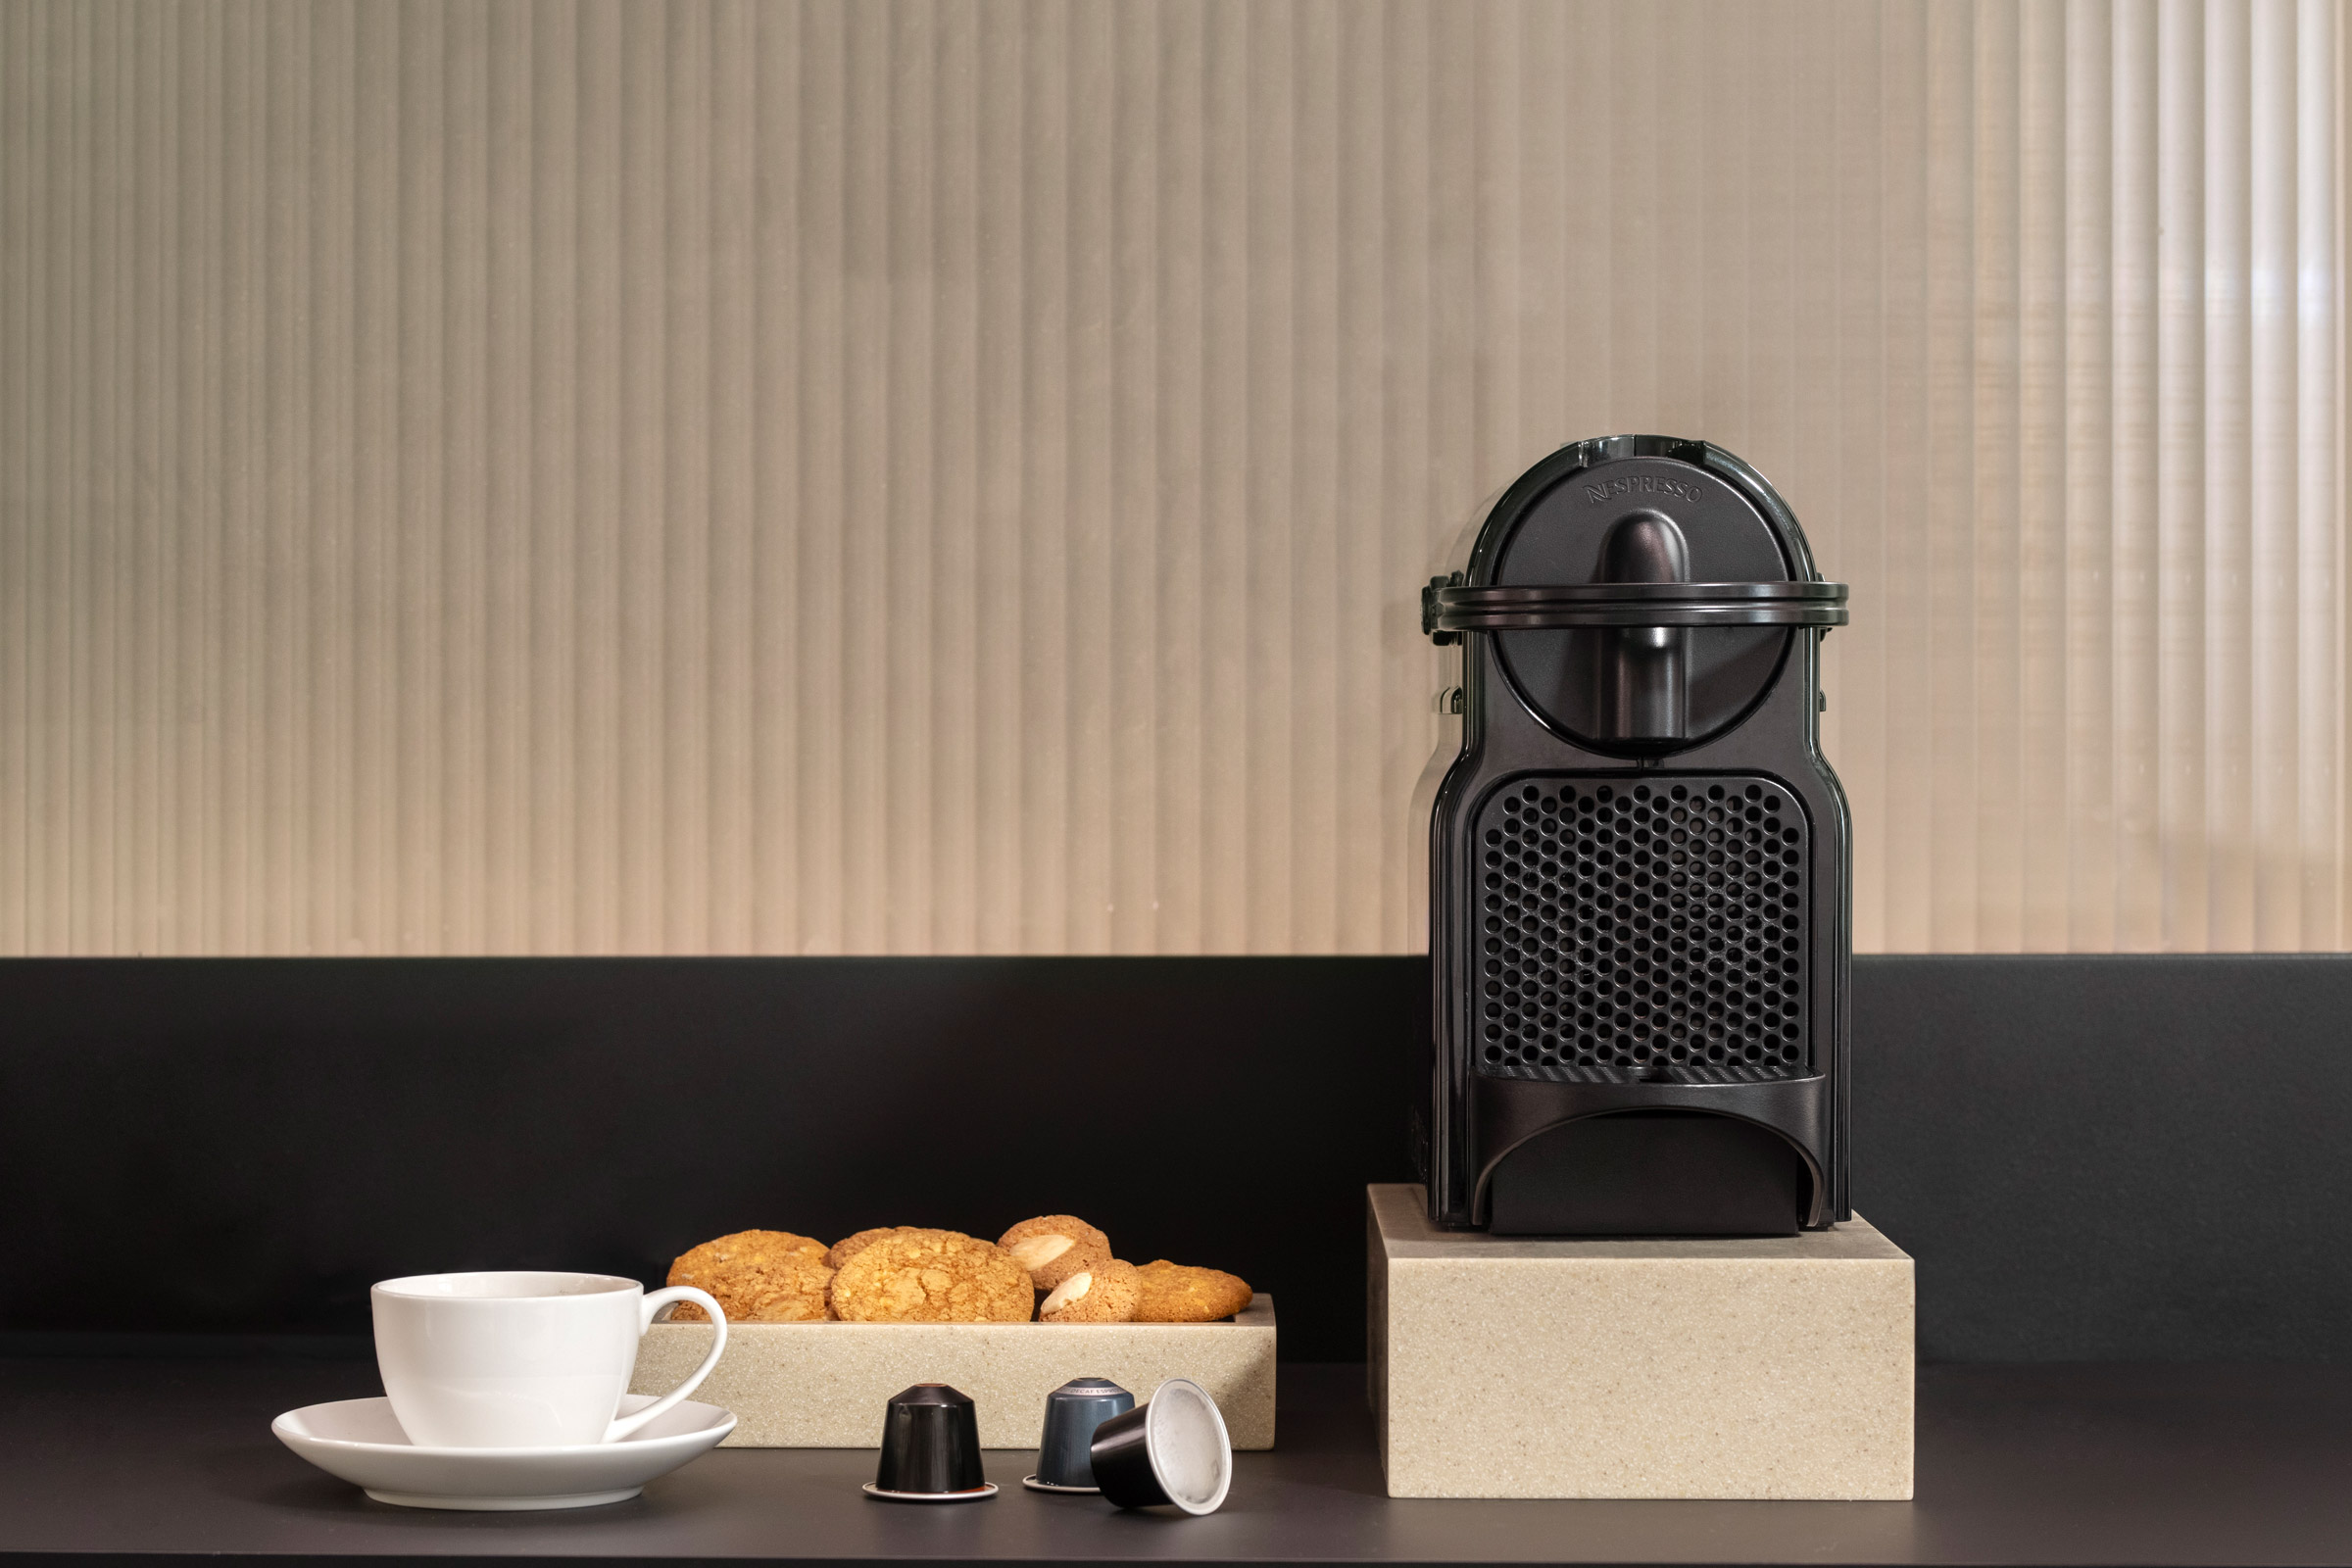 Fresh morning coffee in your Cancun suite